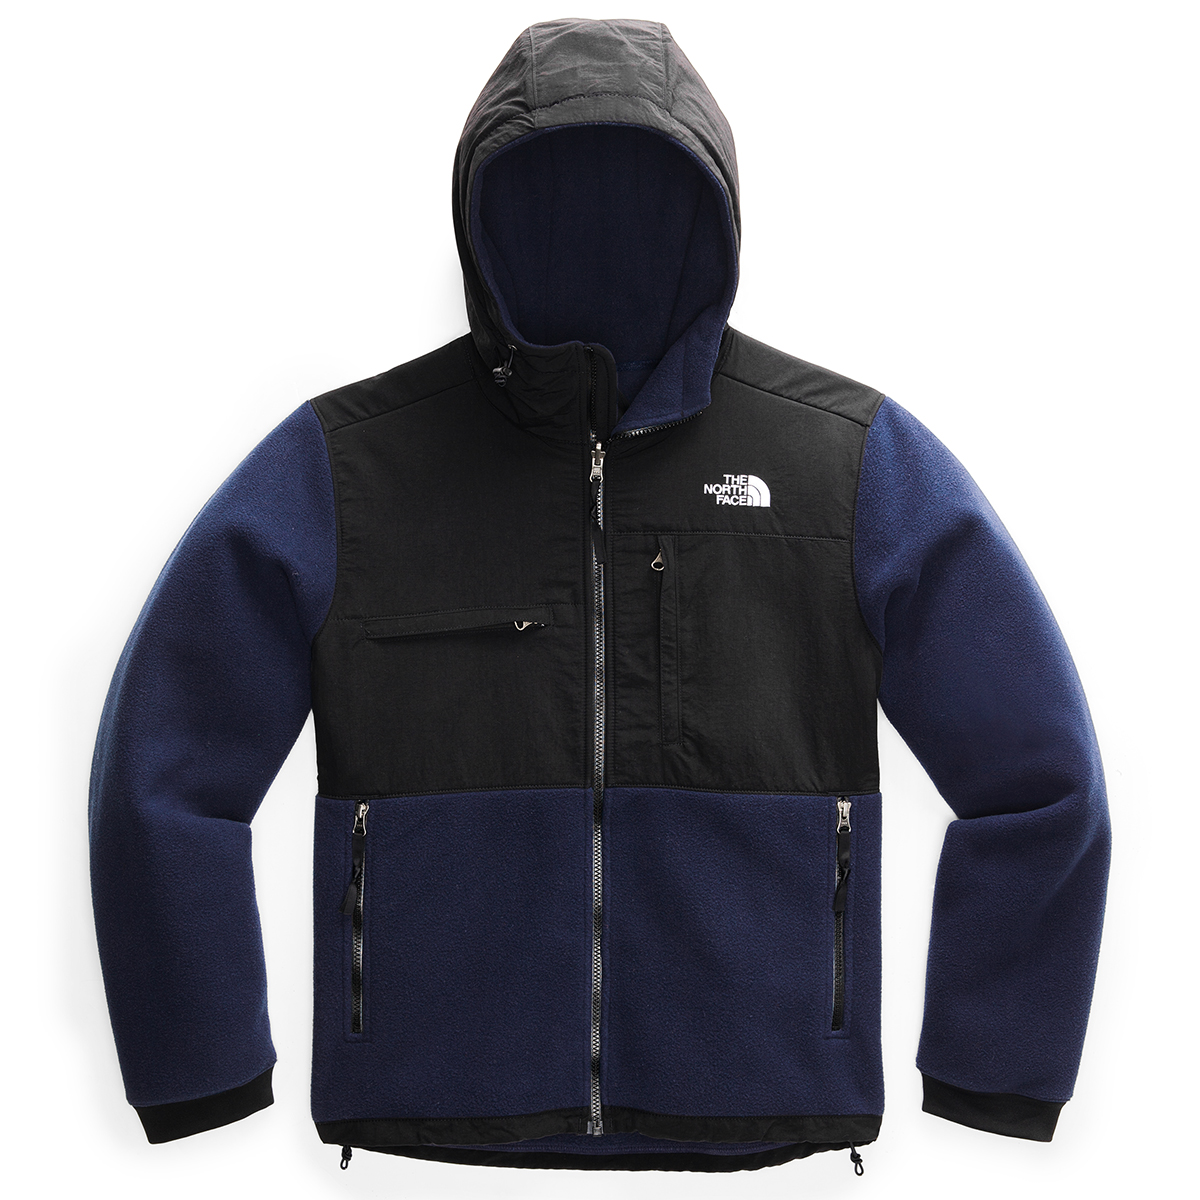 THE NORTH FACE Men's Denali 2 Hoodie - Eastern Mountain Sports